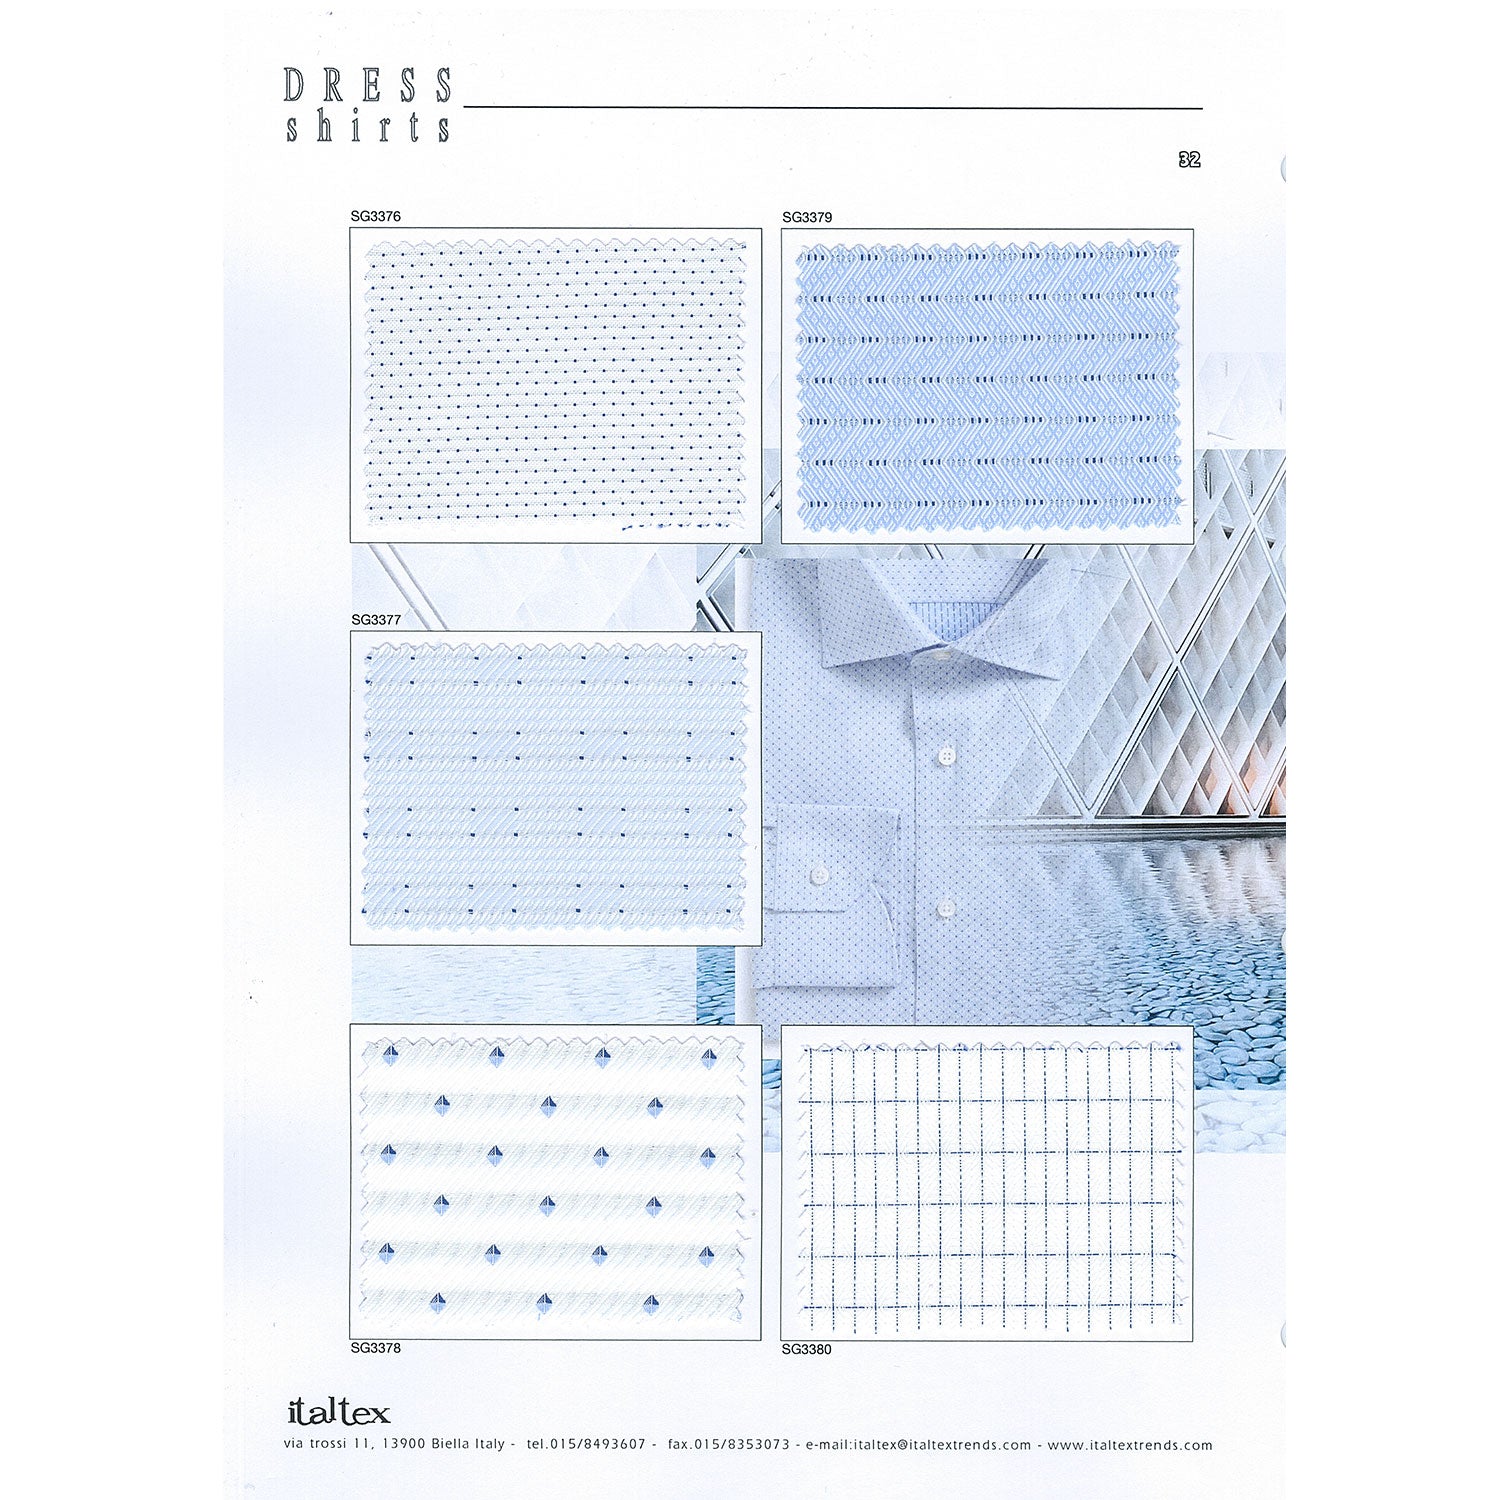 Five fabric swatches for dress shirts with extra yarns in blue and white. One creates a diagonal effect made of tiny dots. One creates an horizontal striped pattern. One creates a binary horizontal stripe. One creates small diamond patterns, and one is a graphic grid